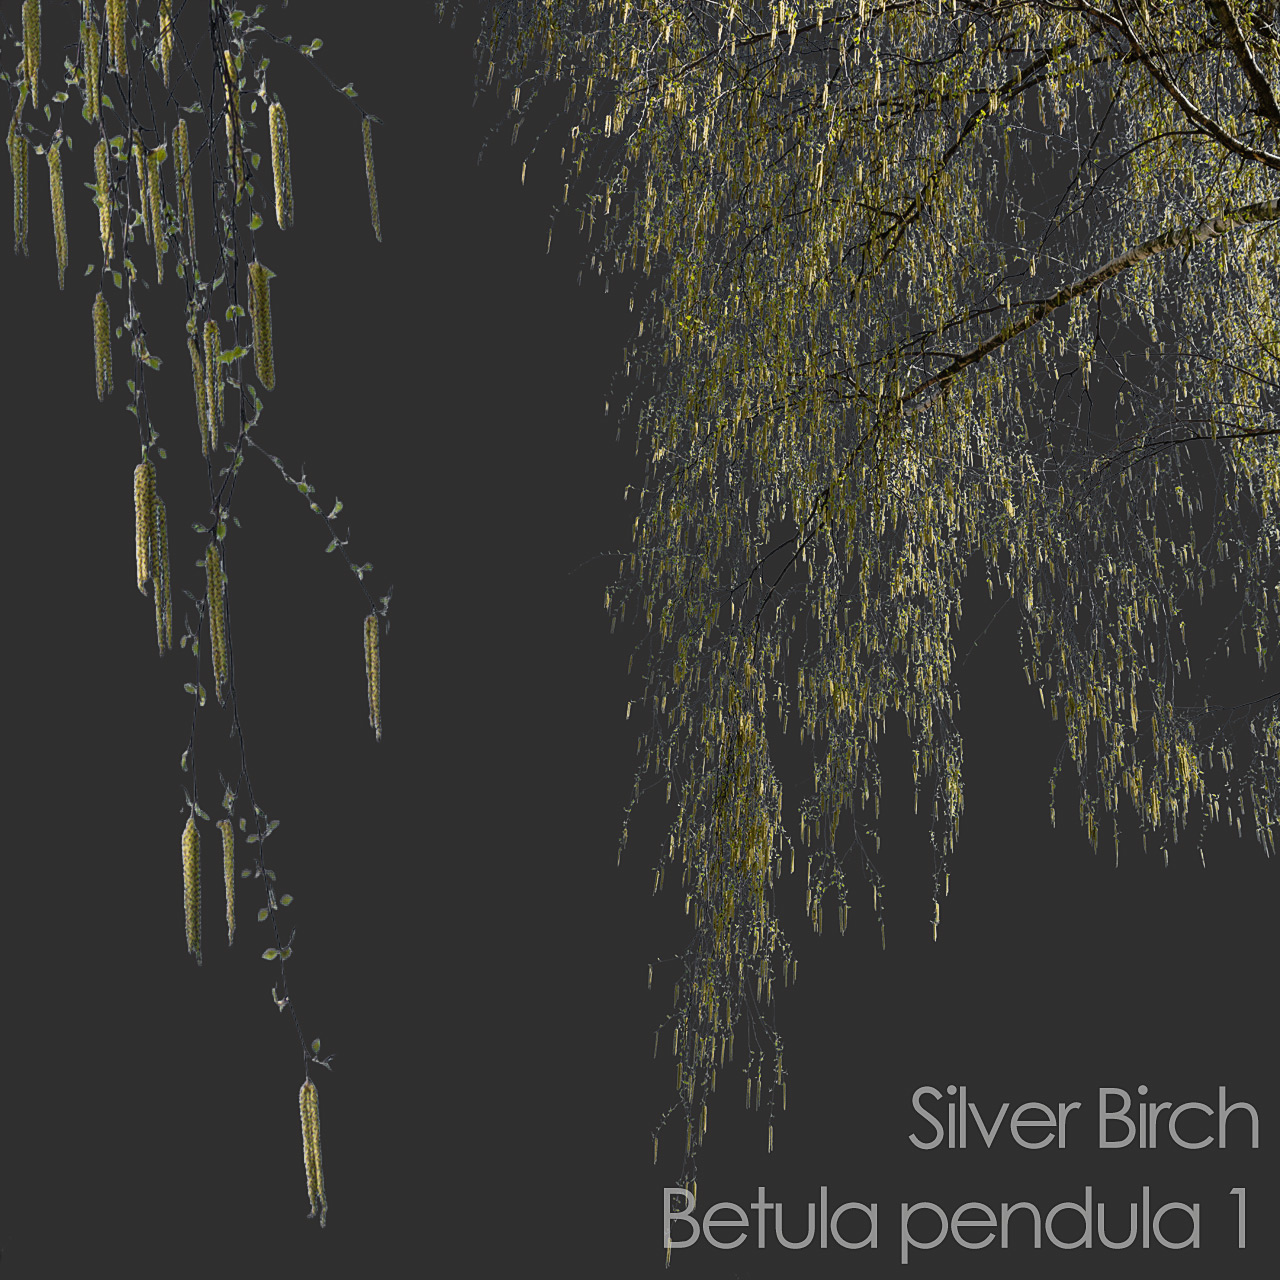 Silver Birch foreground spring tree branch cutout